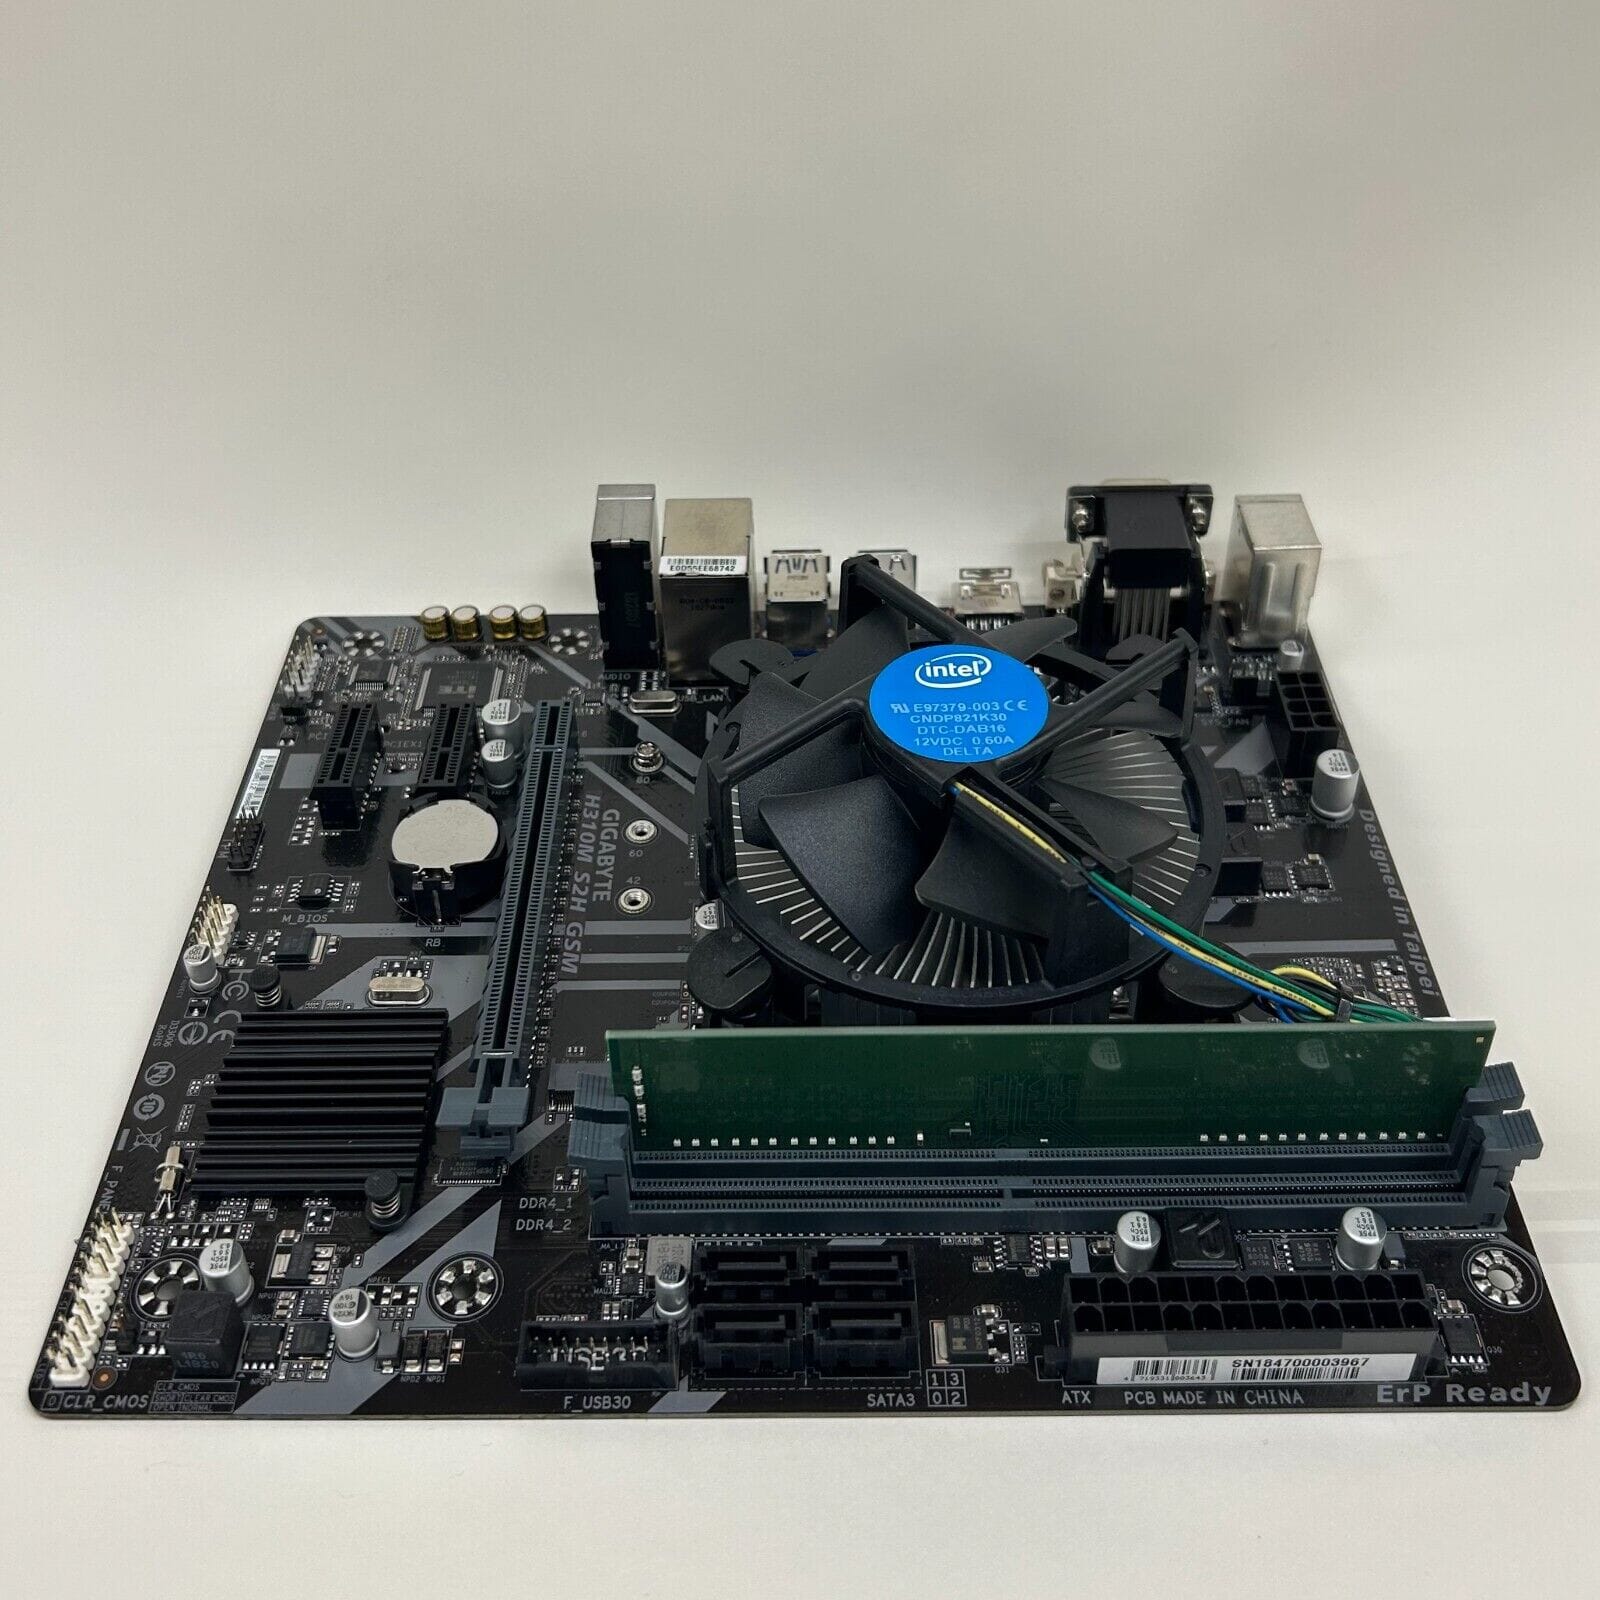 Gigabyte M-ATX motherboard with Intel Core i3 8100 CPU and 8GB DDR4 RAM-  USED